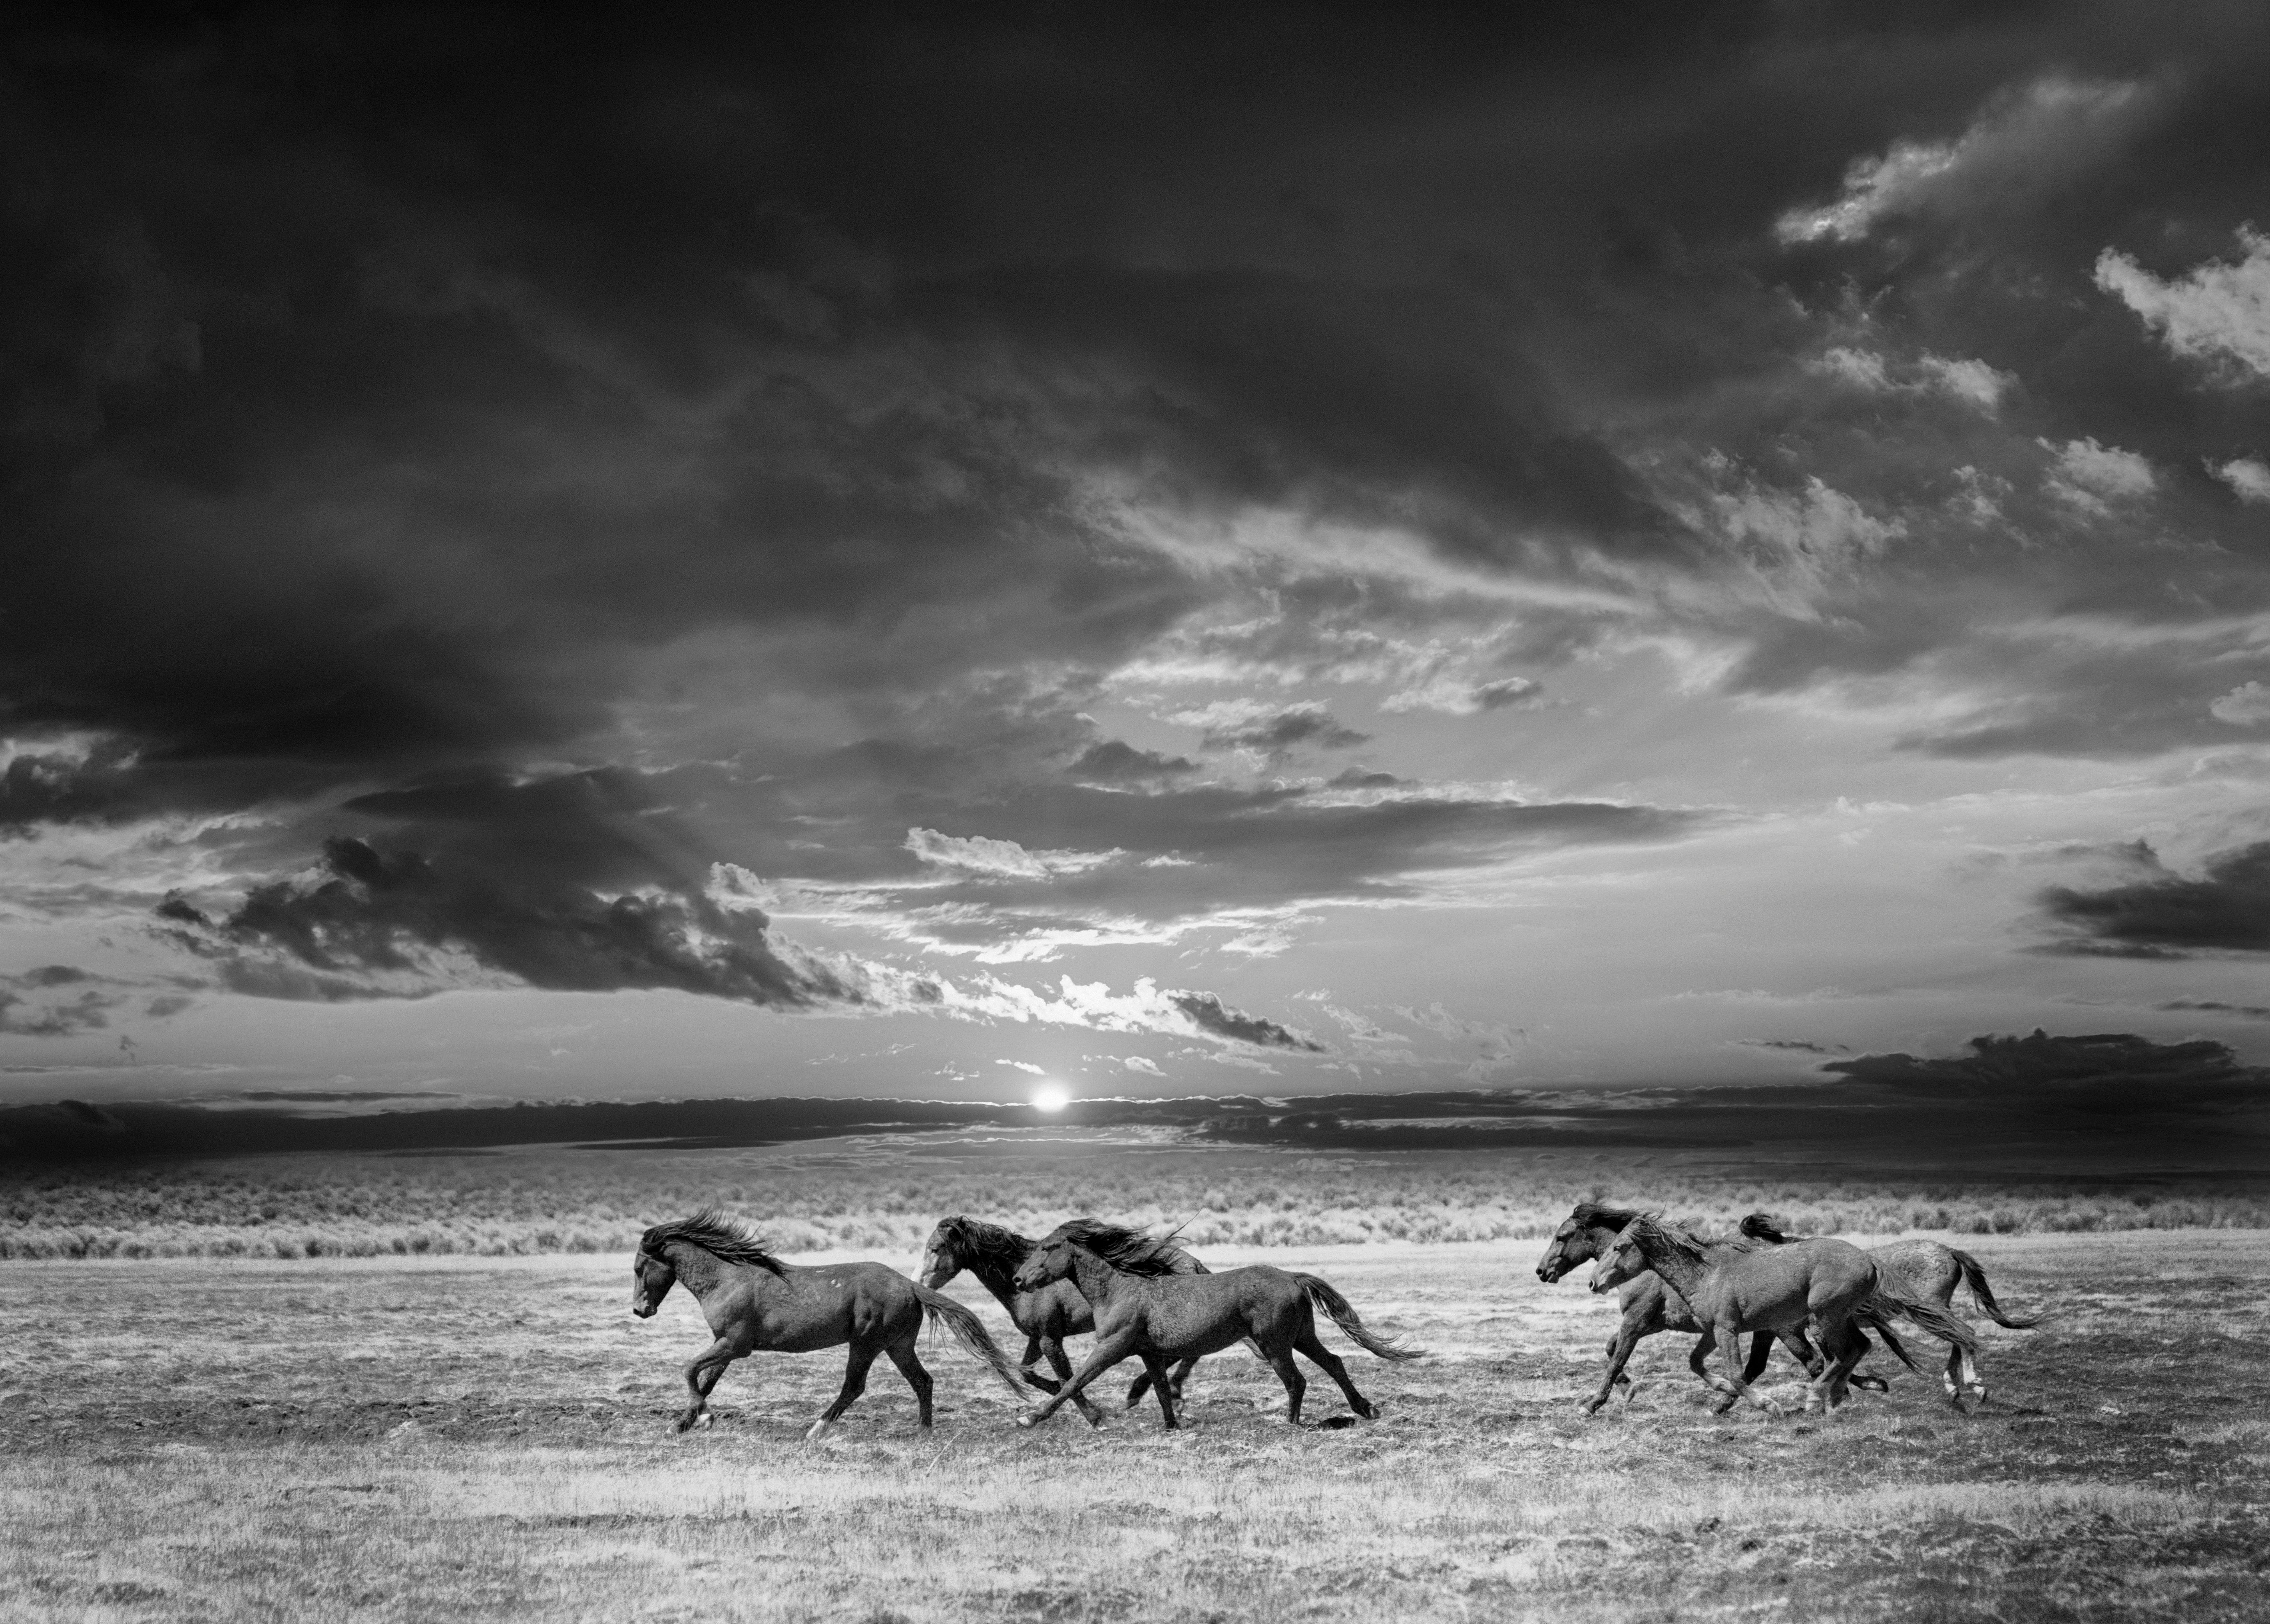 Shane Russeck Black and White Photograph - "Chasing the Light" 60x40- Contemporary Black & White Photography of Wild Horses